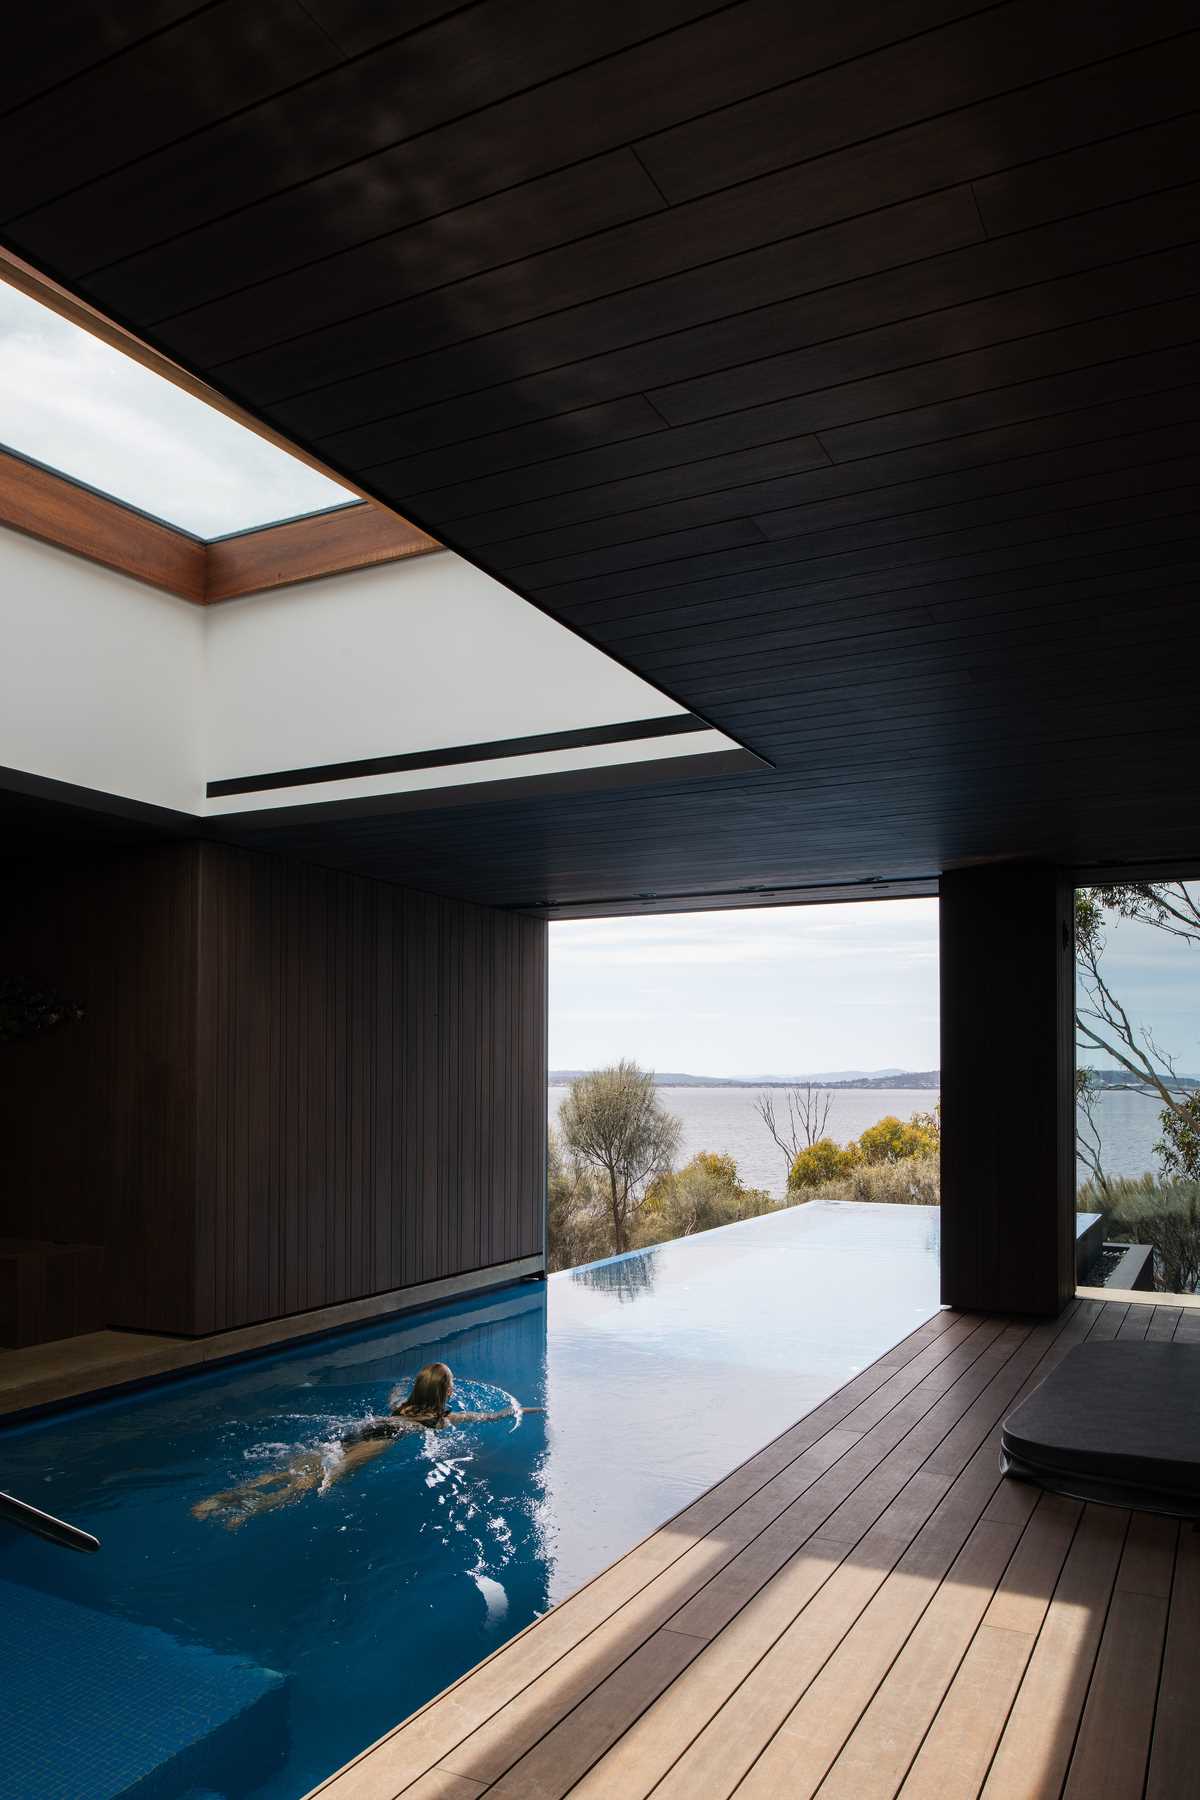 A modern swimming pool that travels from the interior to the exterior of the home.